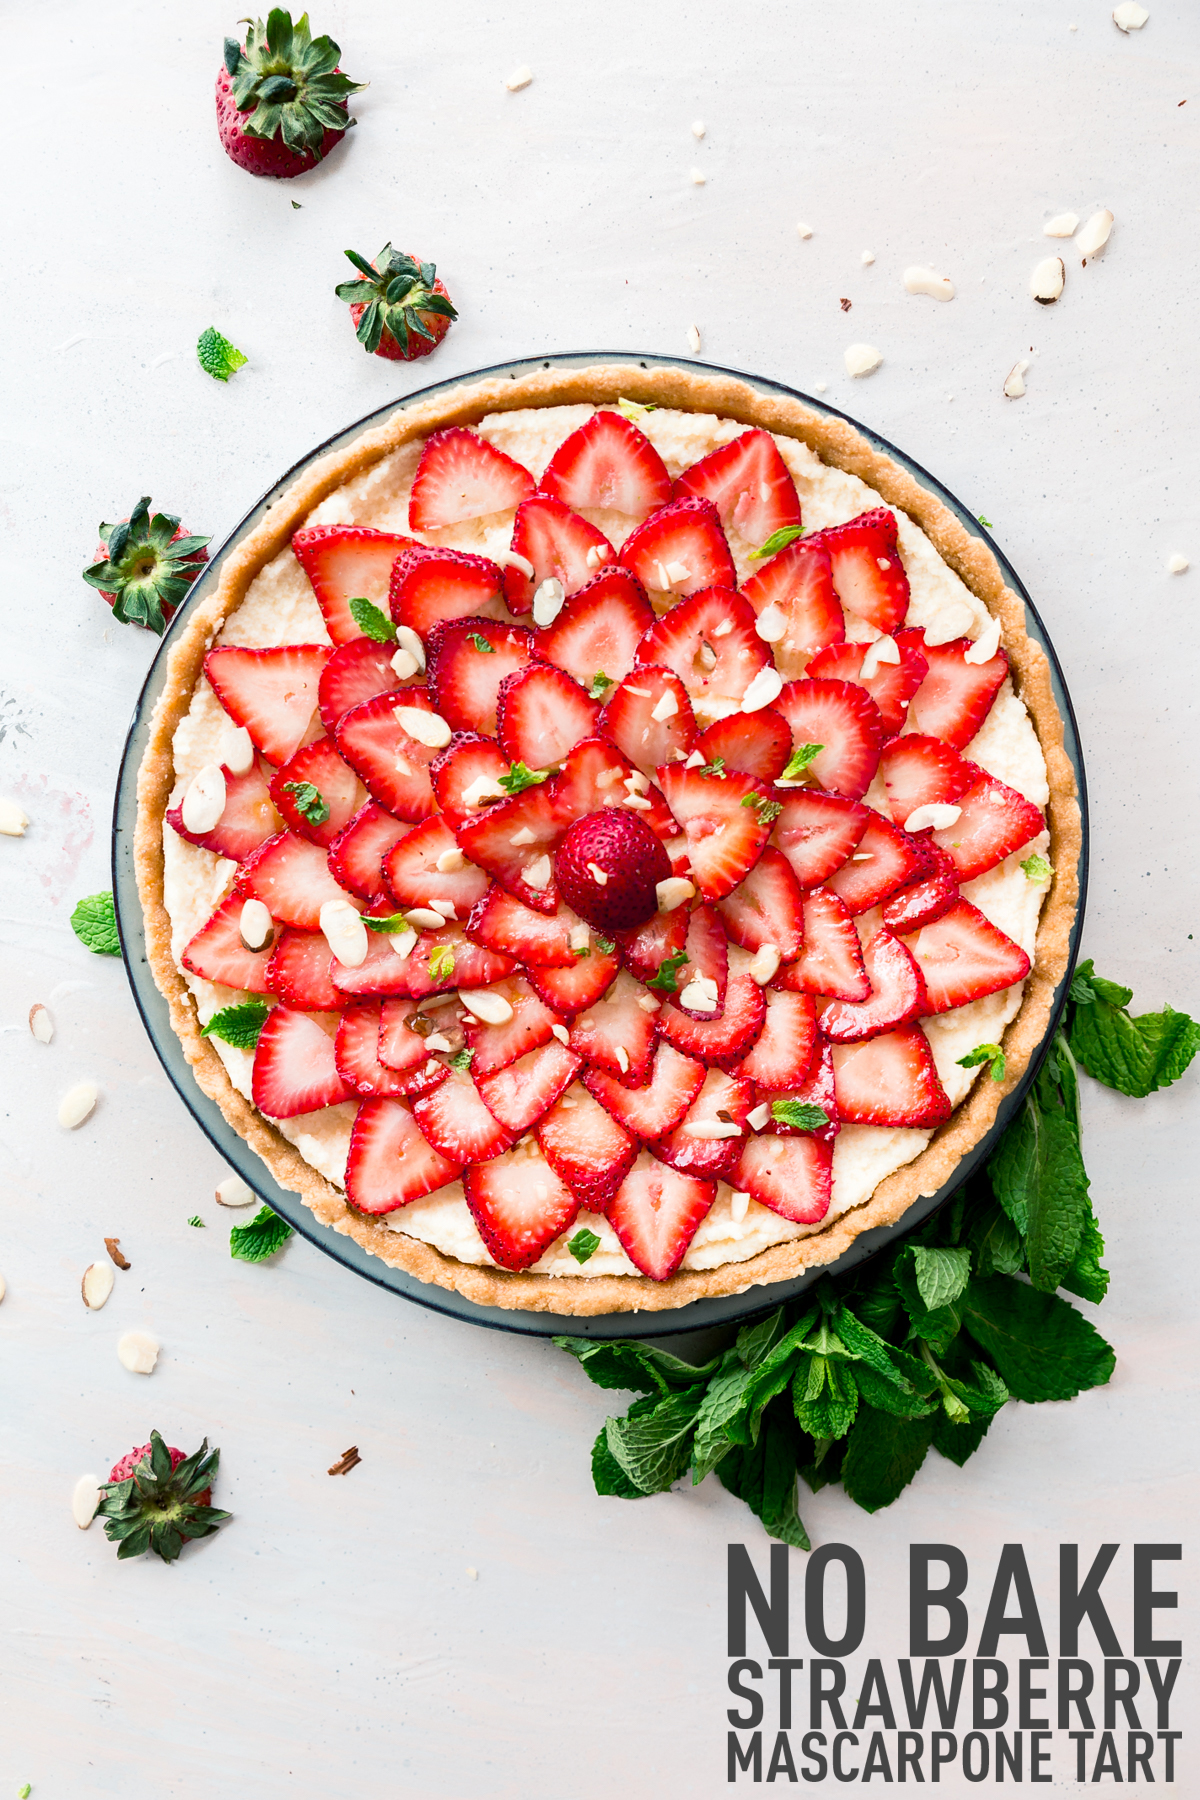 No-Bake Strawberry Mascarpone Tart made with fresh fruit and mascarpone cheese. Perfect for mother's day or any occasion.